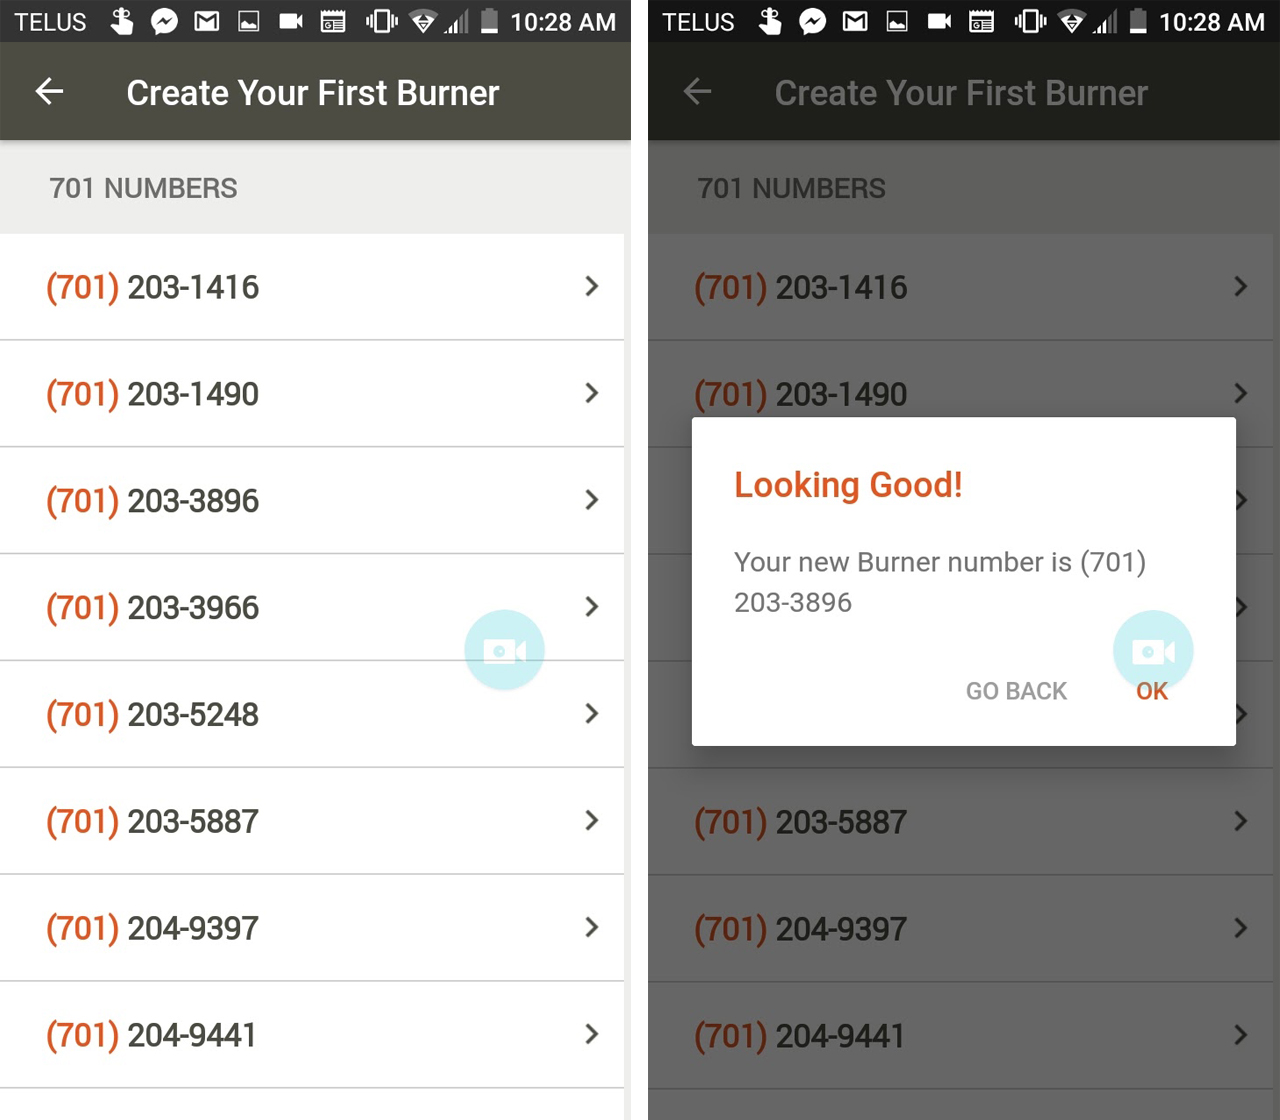 Creating a new phone number in the Burner app